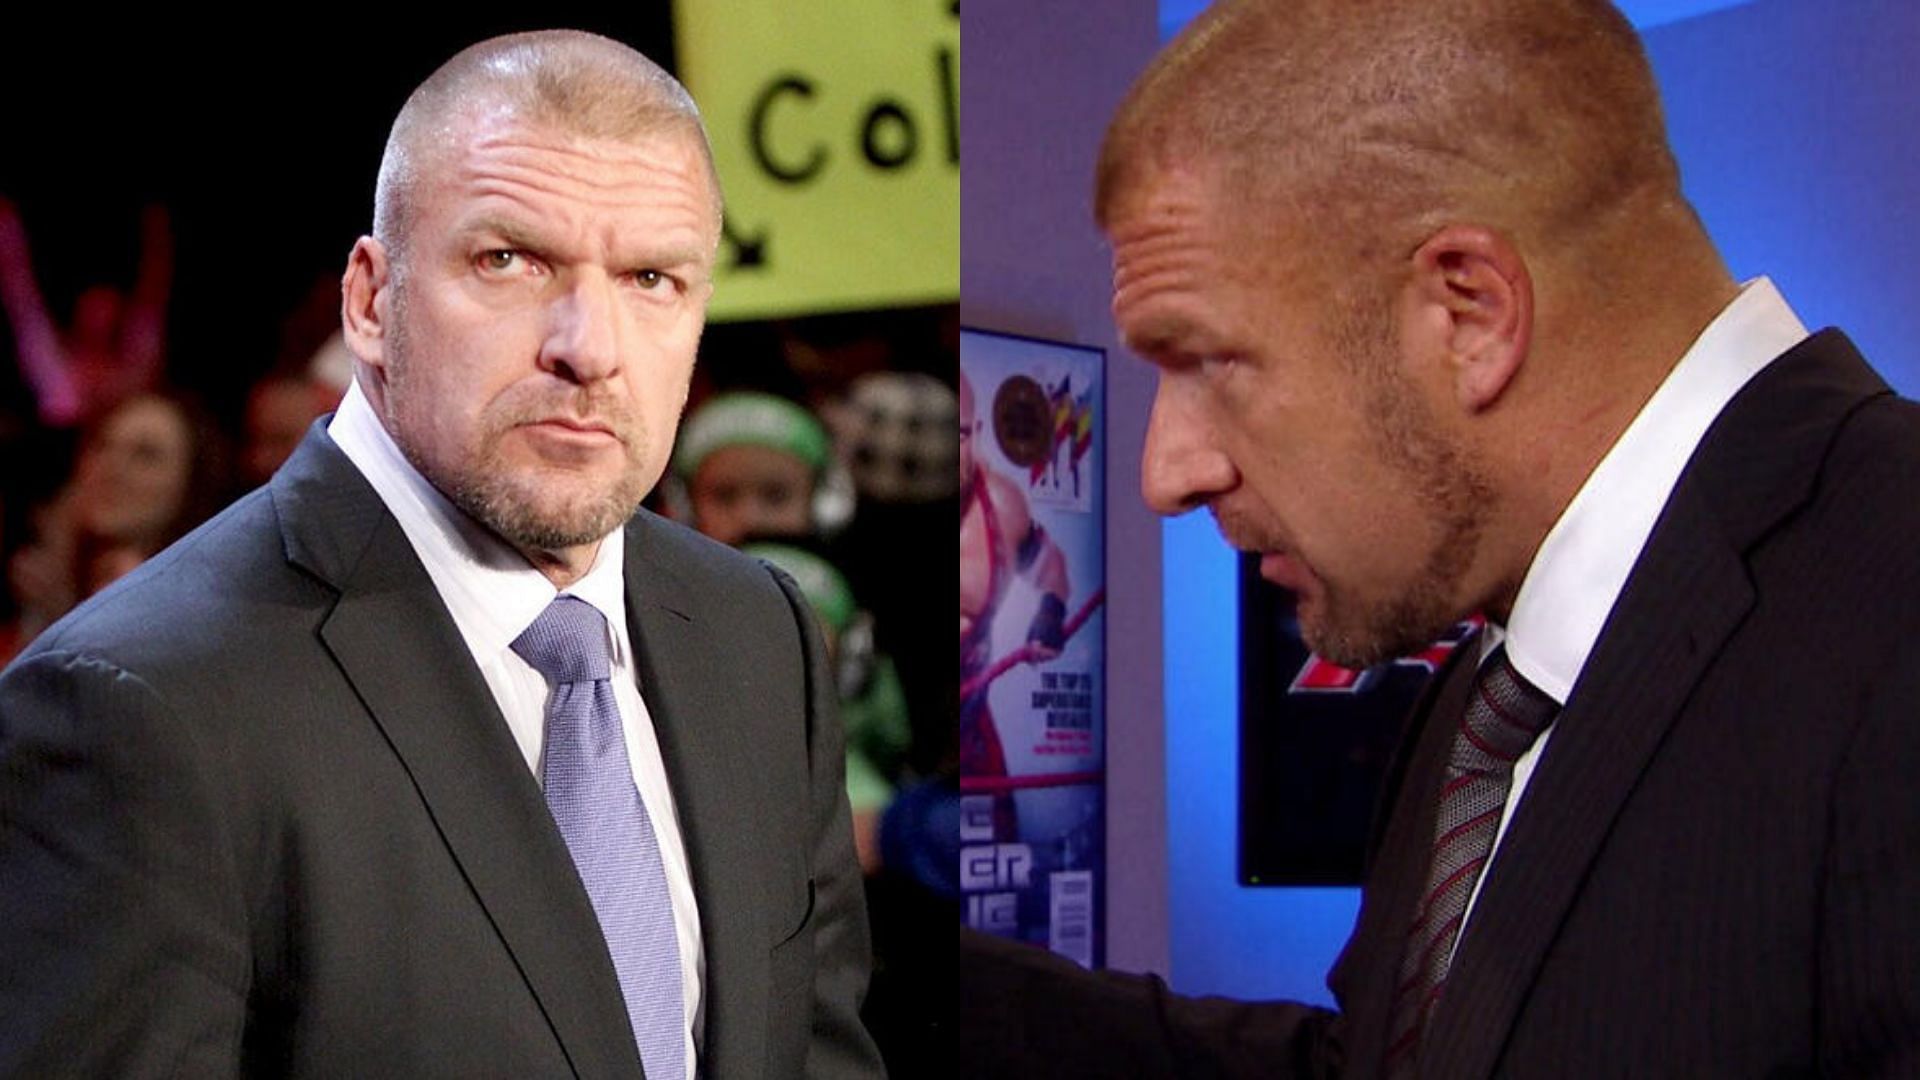 Triple H has been asked to fire the star previously